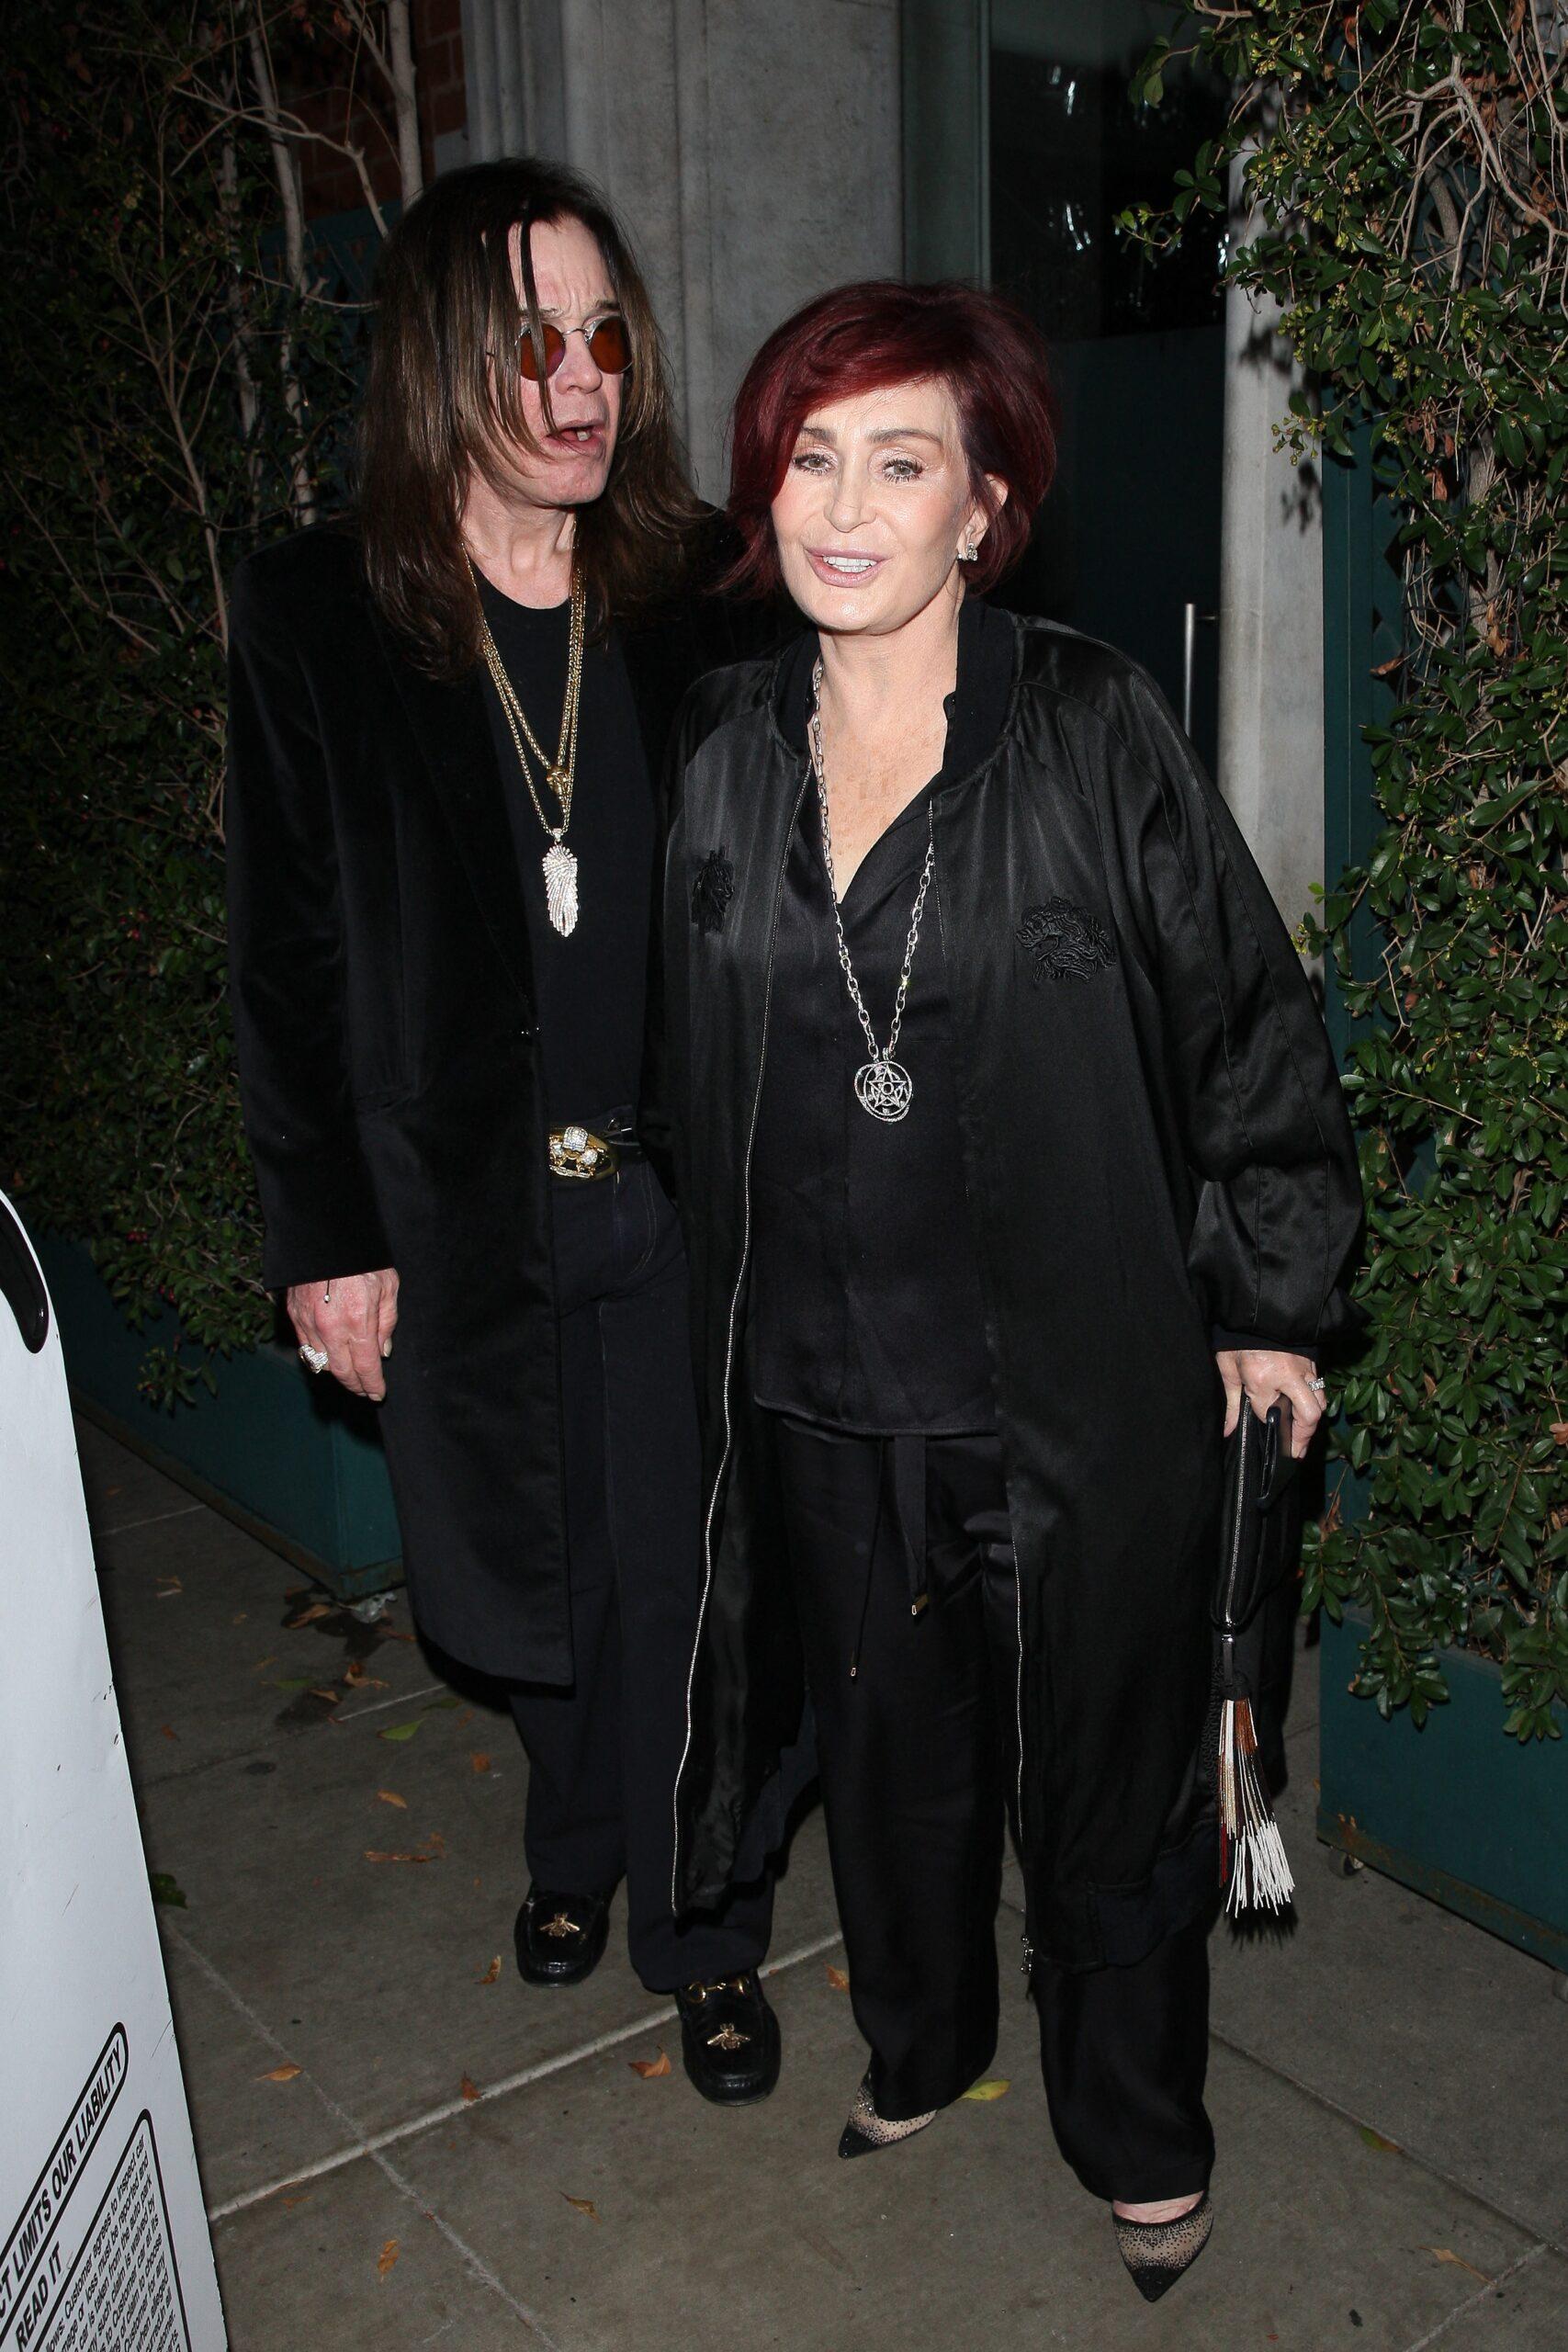 Ozzy and Sharon Osbourne hold hands as they leave Mr Chow restaurant after celebrating Billy Idol's 63rd birthday party